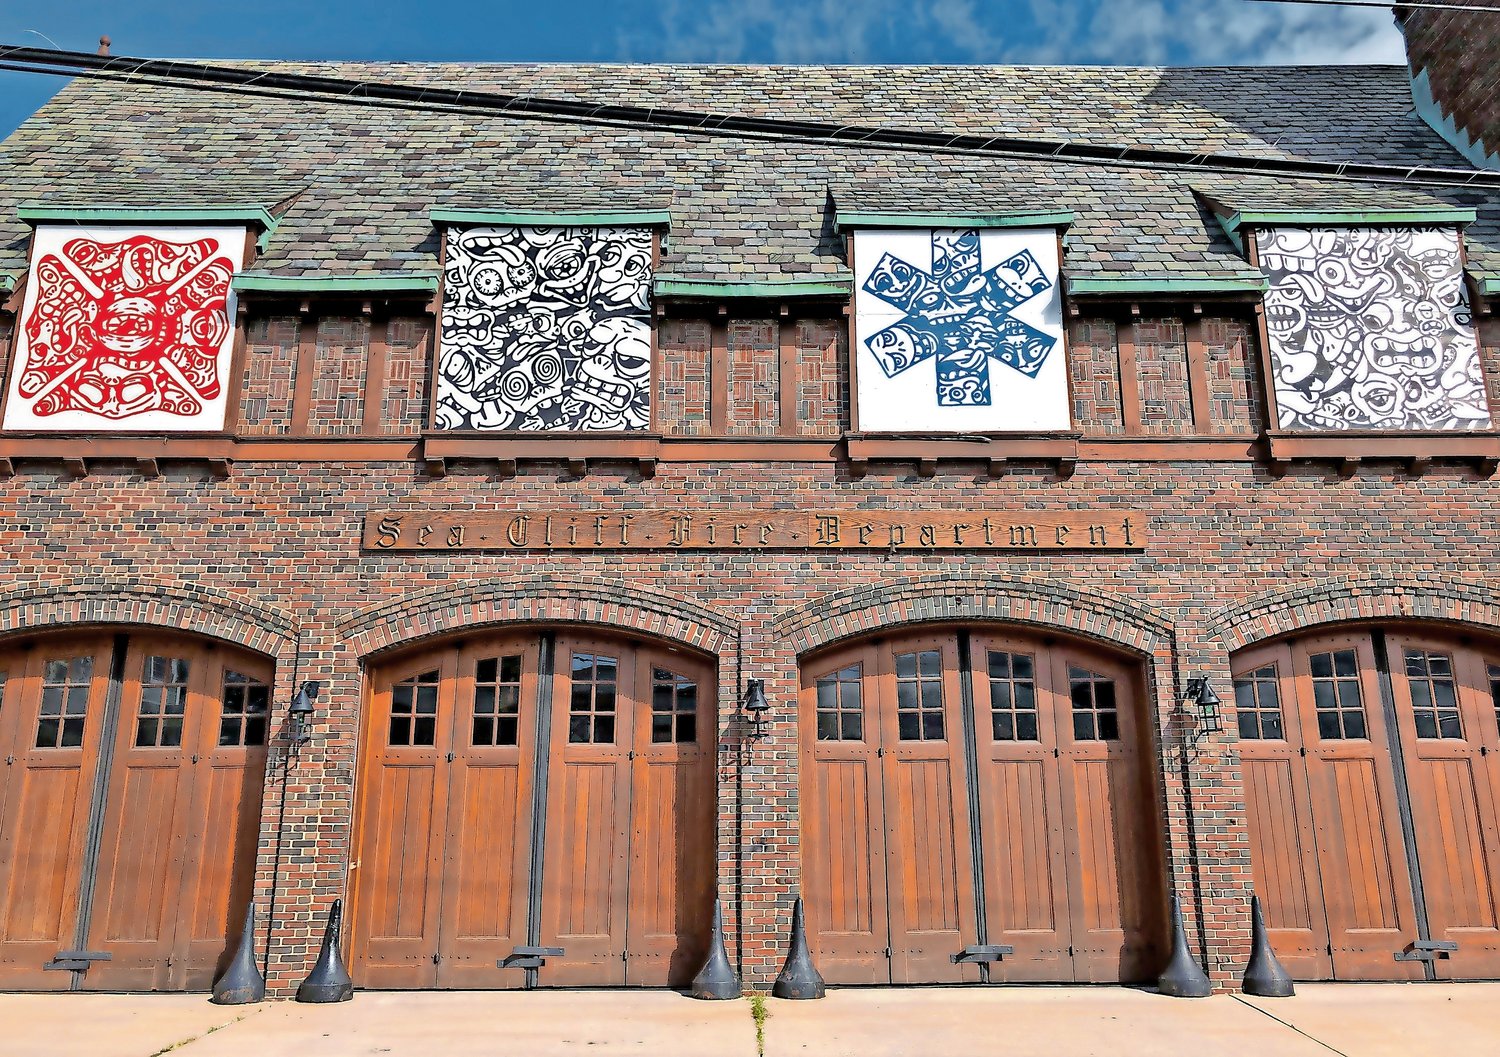 During renovations, the windows of the Sea Cliff Firehouse were replaced by an eye-catching art installation designed by local artist James Roth.